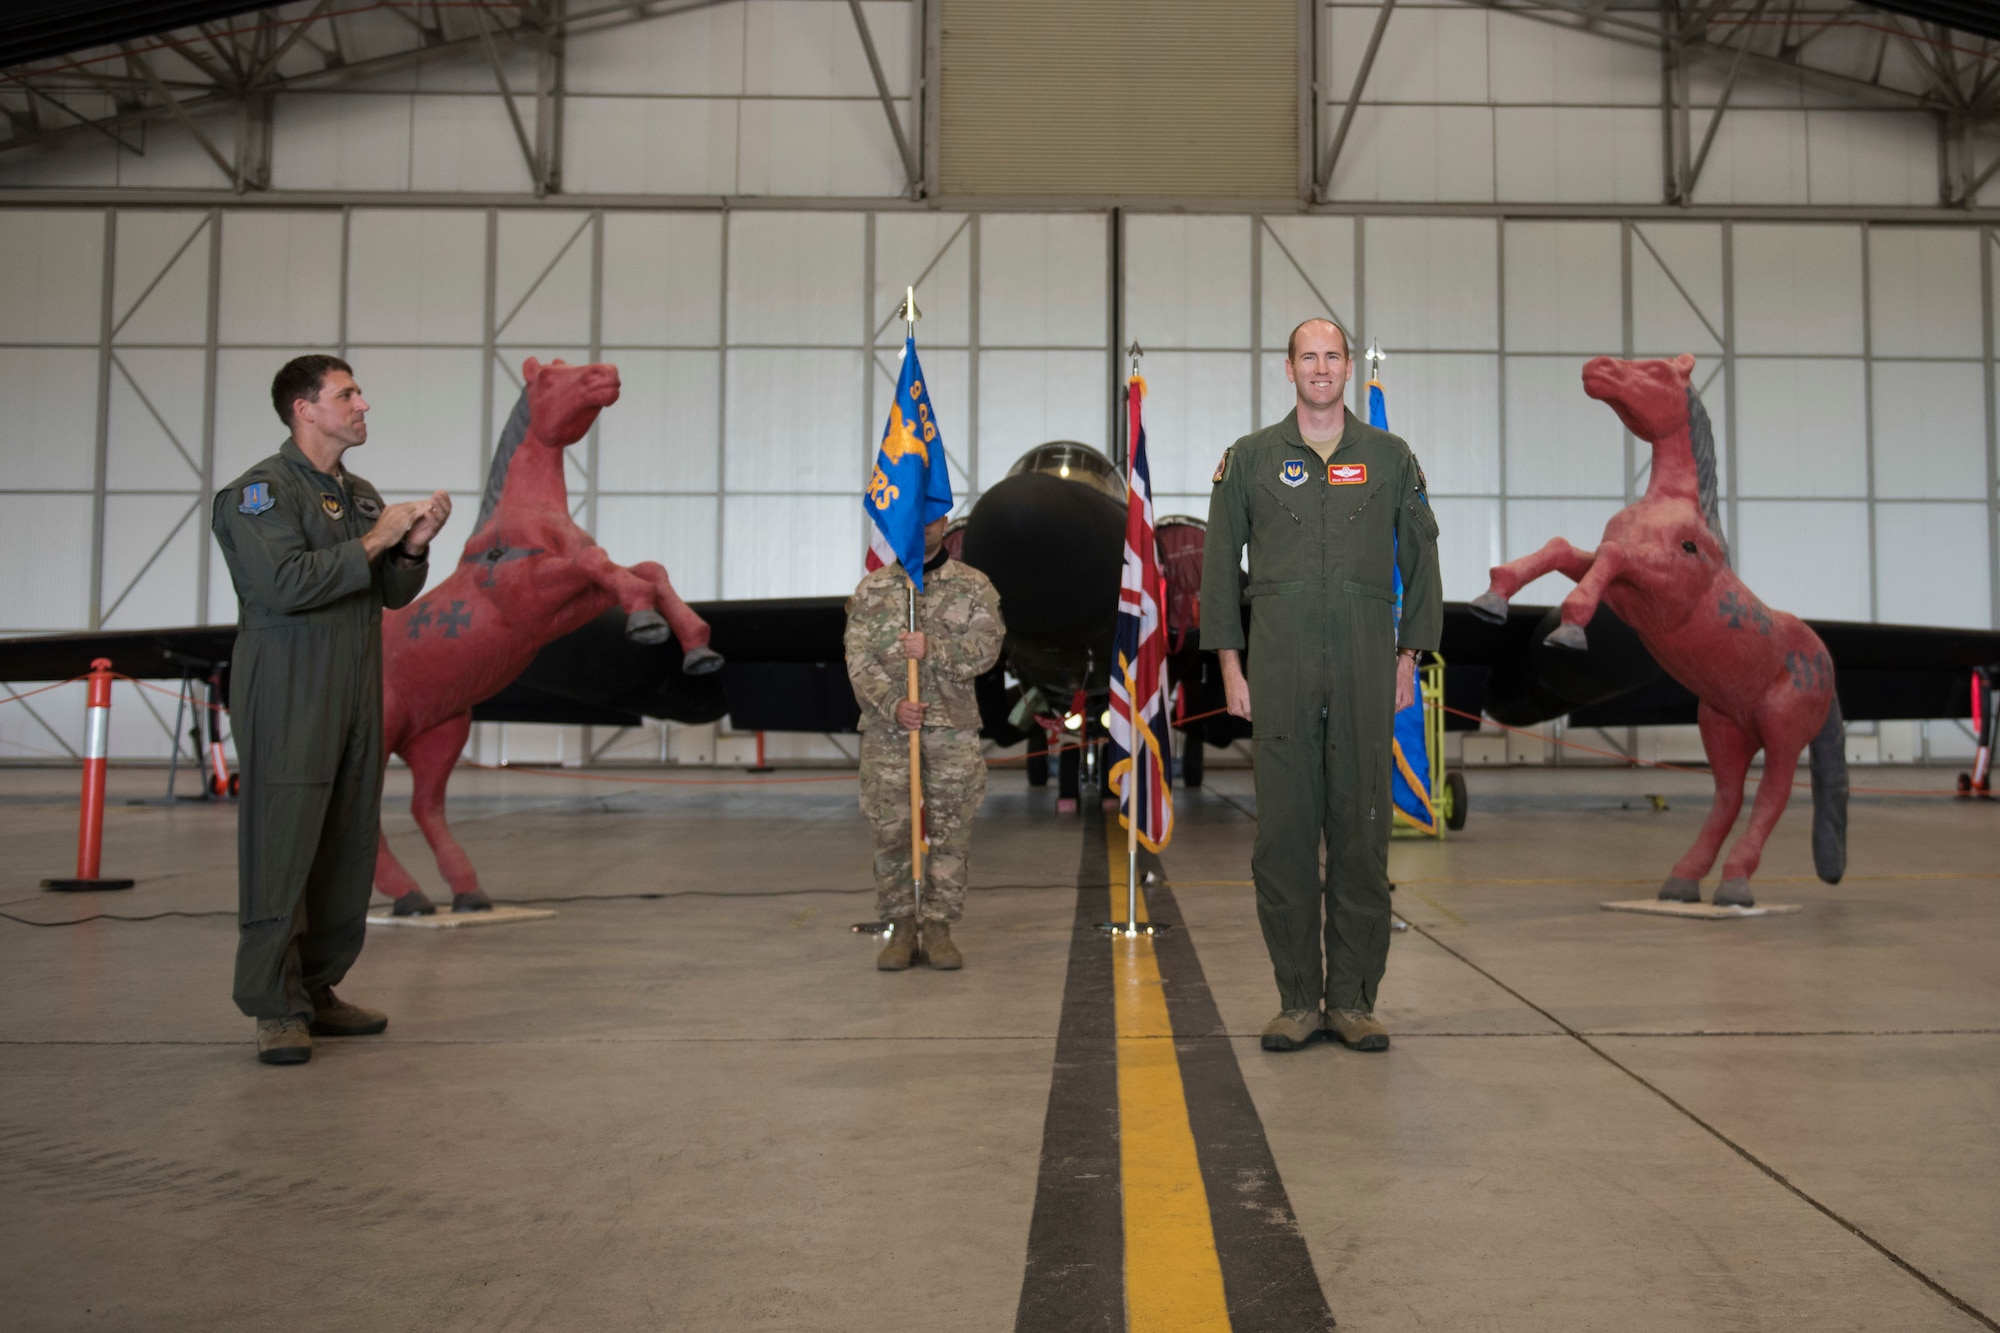 U.S. Air Force Lt. Col. Brian Staniszewski, assumes command of the 99th Expeditionary Reconnaissance Squadron, during a change of command ceremony, at RAF Fairford, England, June 24, 2020. The change of command ceremony is a military tradition that represents a formal transfer of a unit’s authority and responsibility from one commander to another. (U.S. Air Force photo by Airman 1st Class Jennifer Zima)